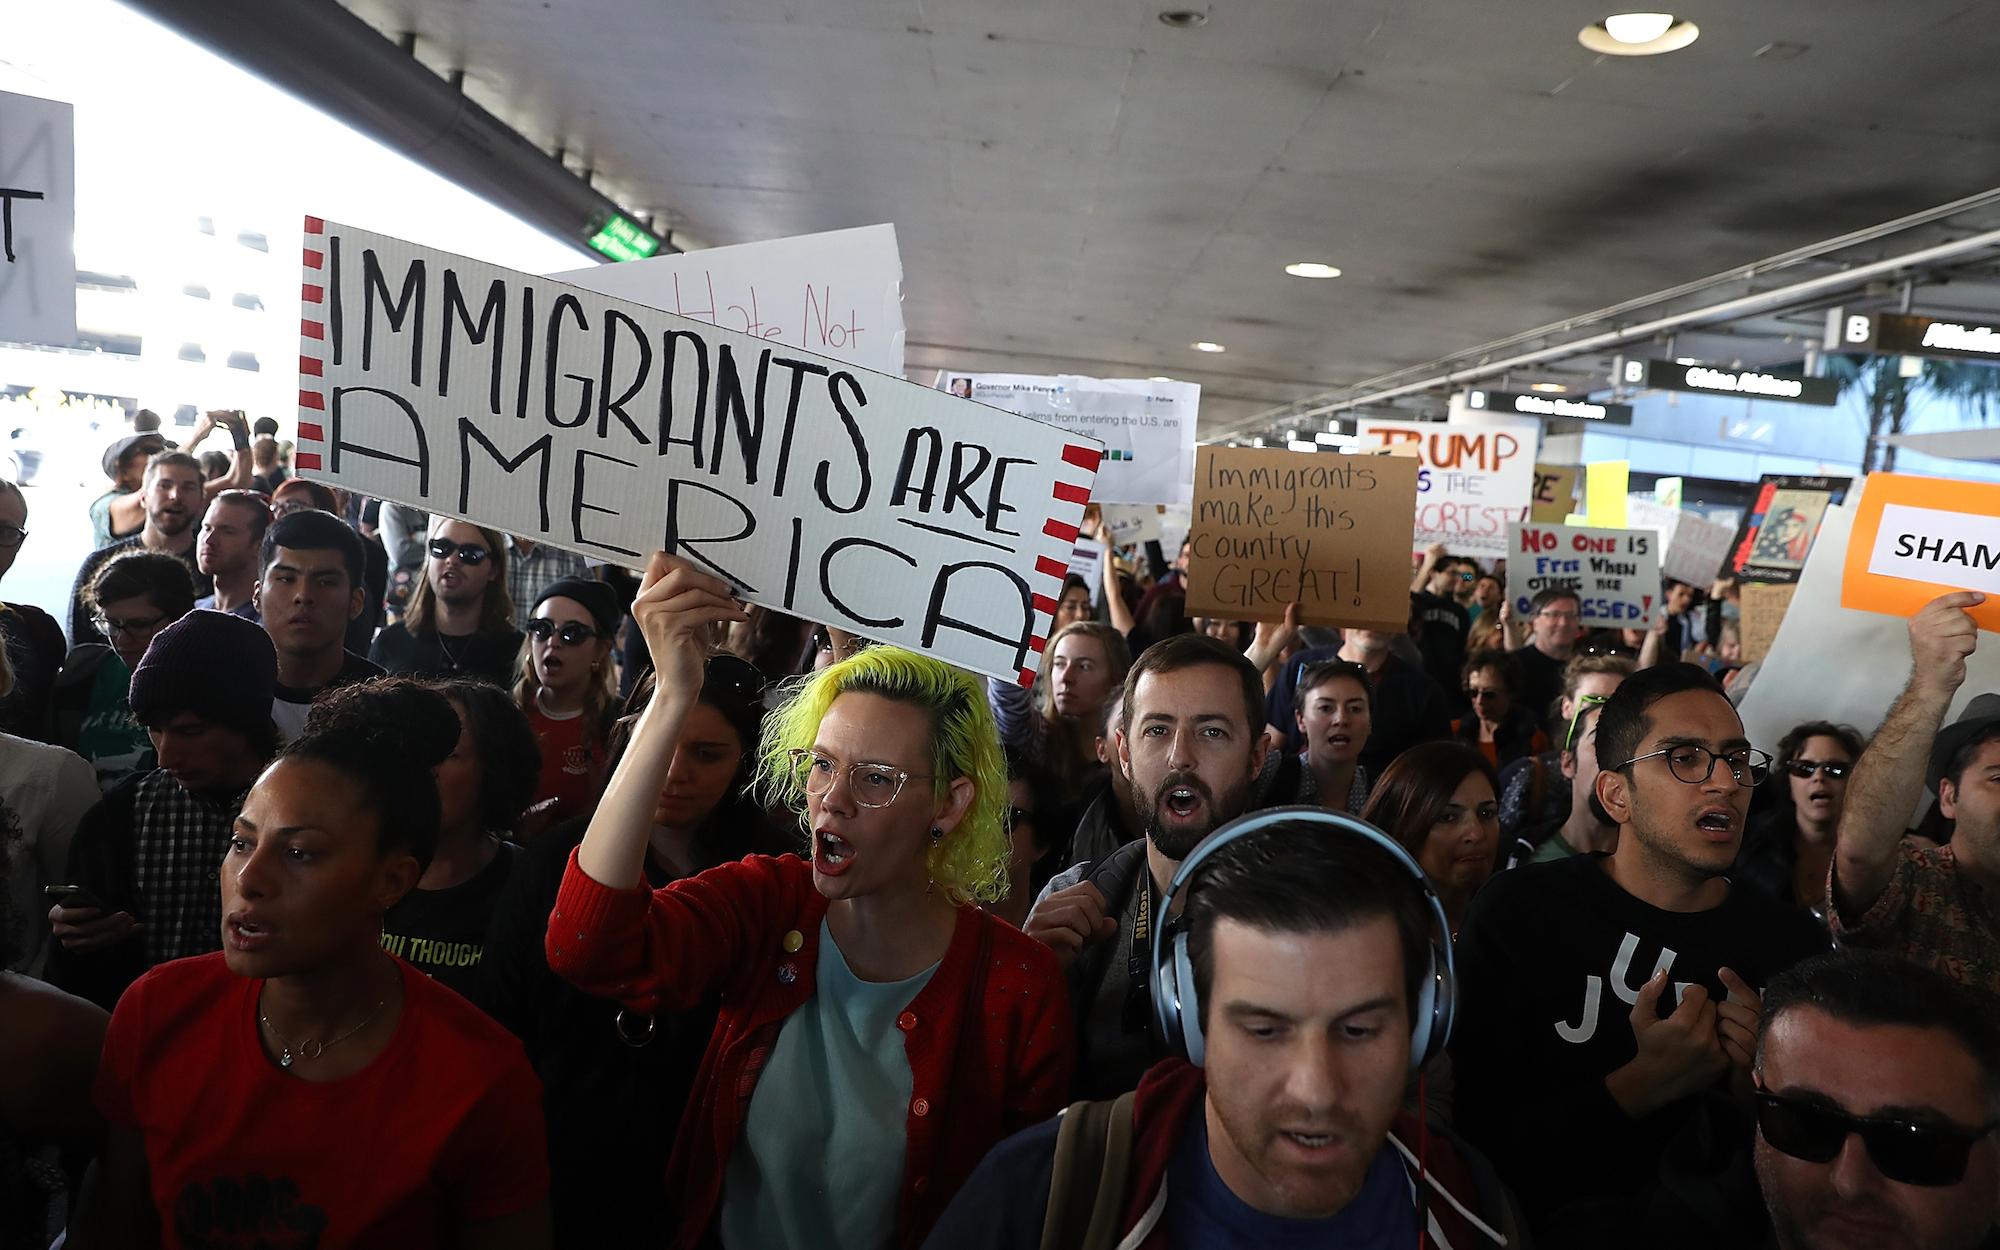 Protesters hold signs during a demonstration against the immigration ban that was imposed by U.S. President Donald Trump at Los Angeles International Airport on January 29, 2017 in Los Angeles, California.